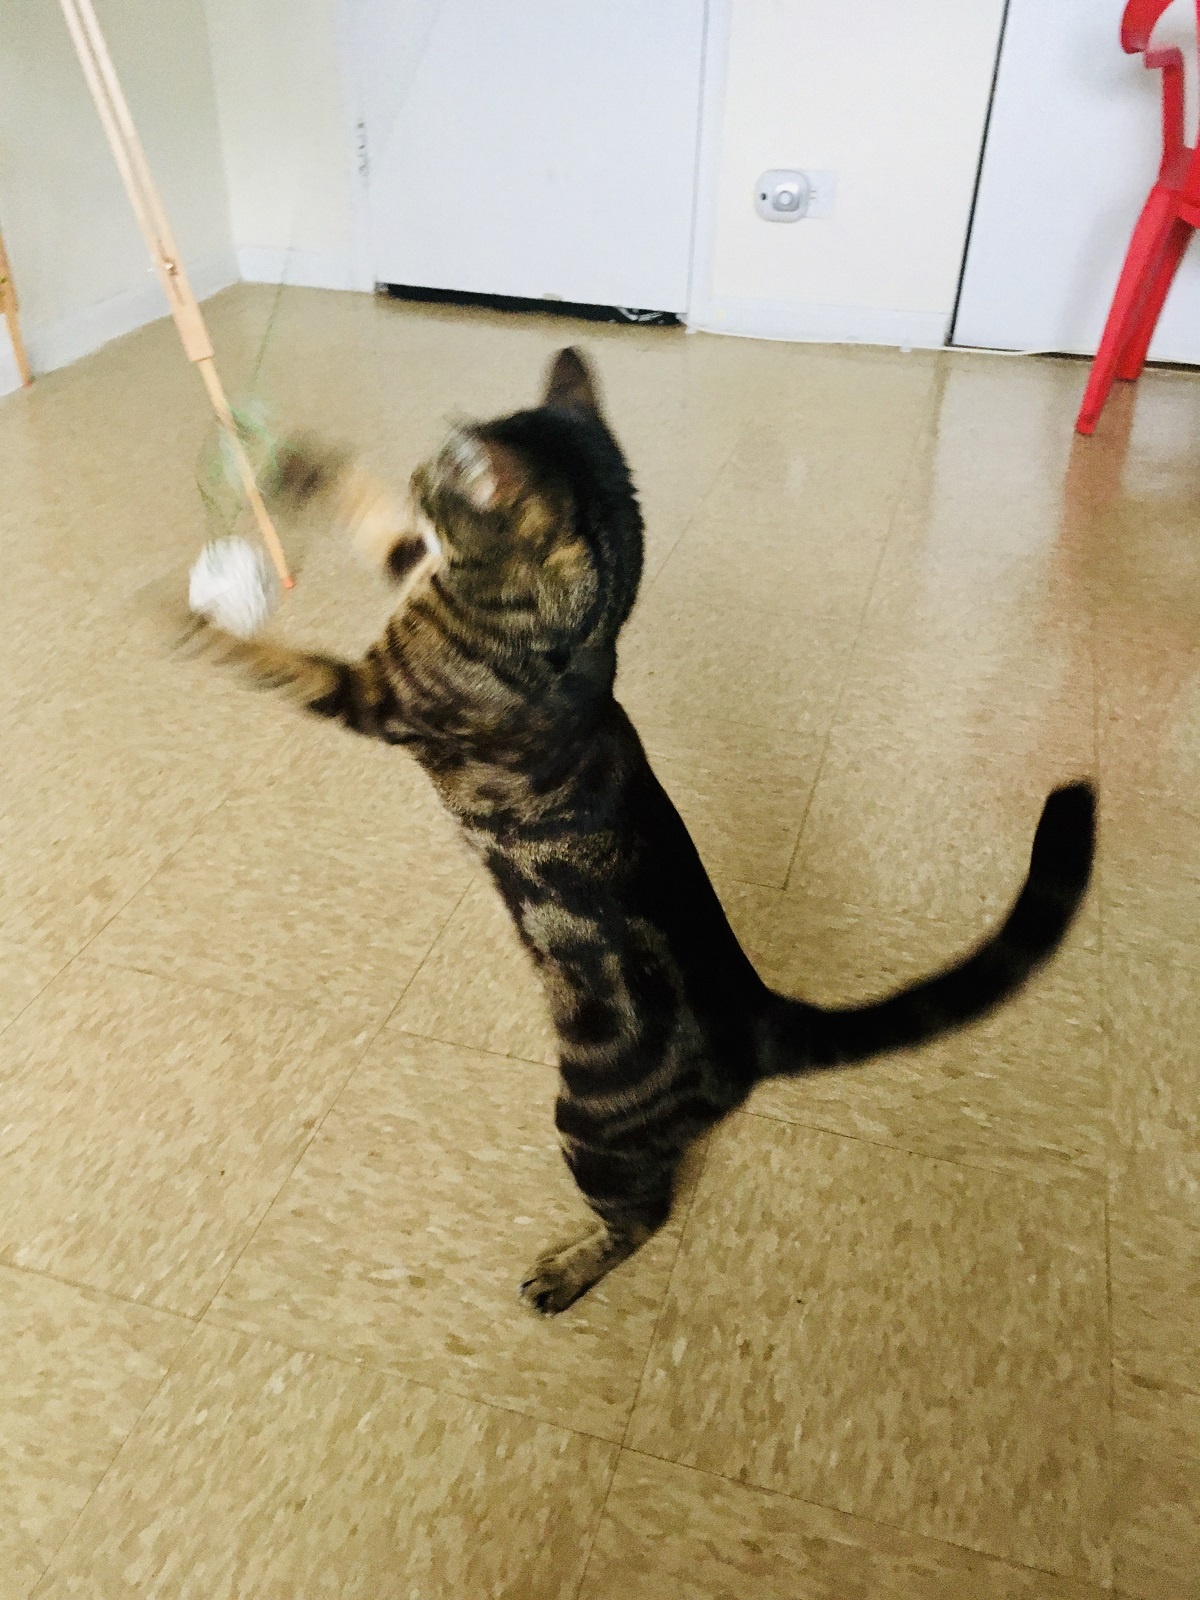 cat playing with wand toy